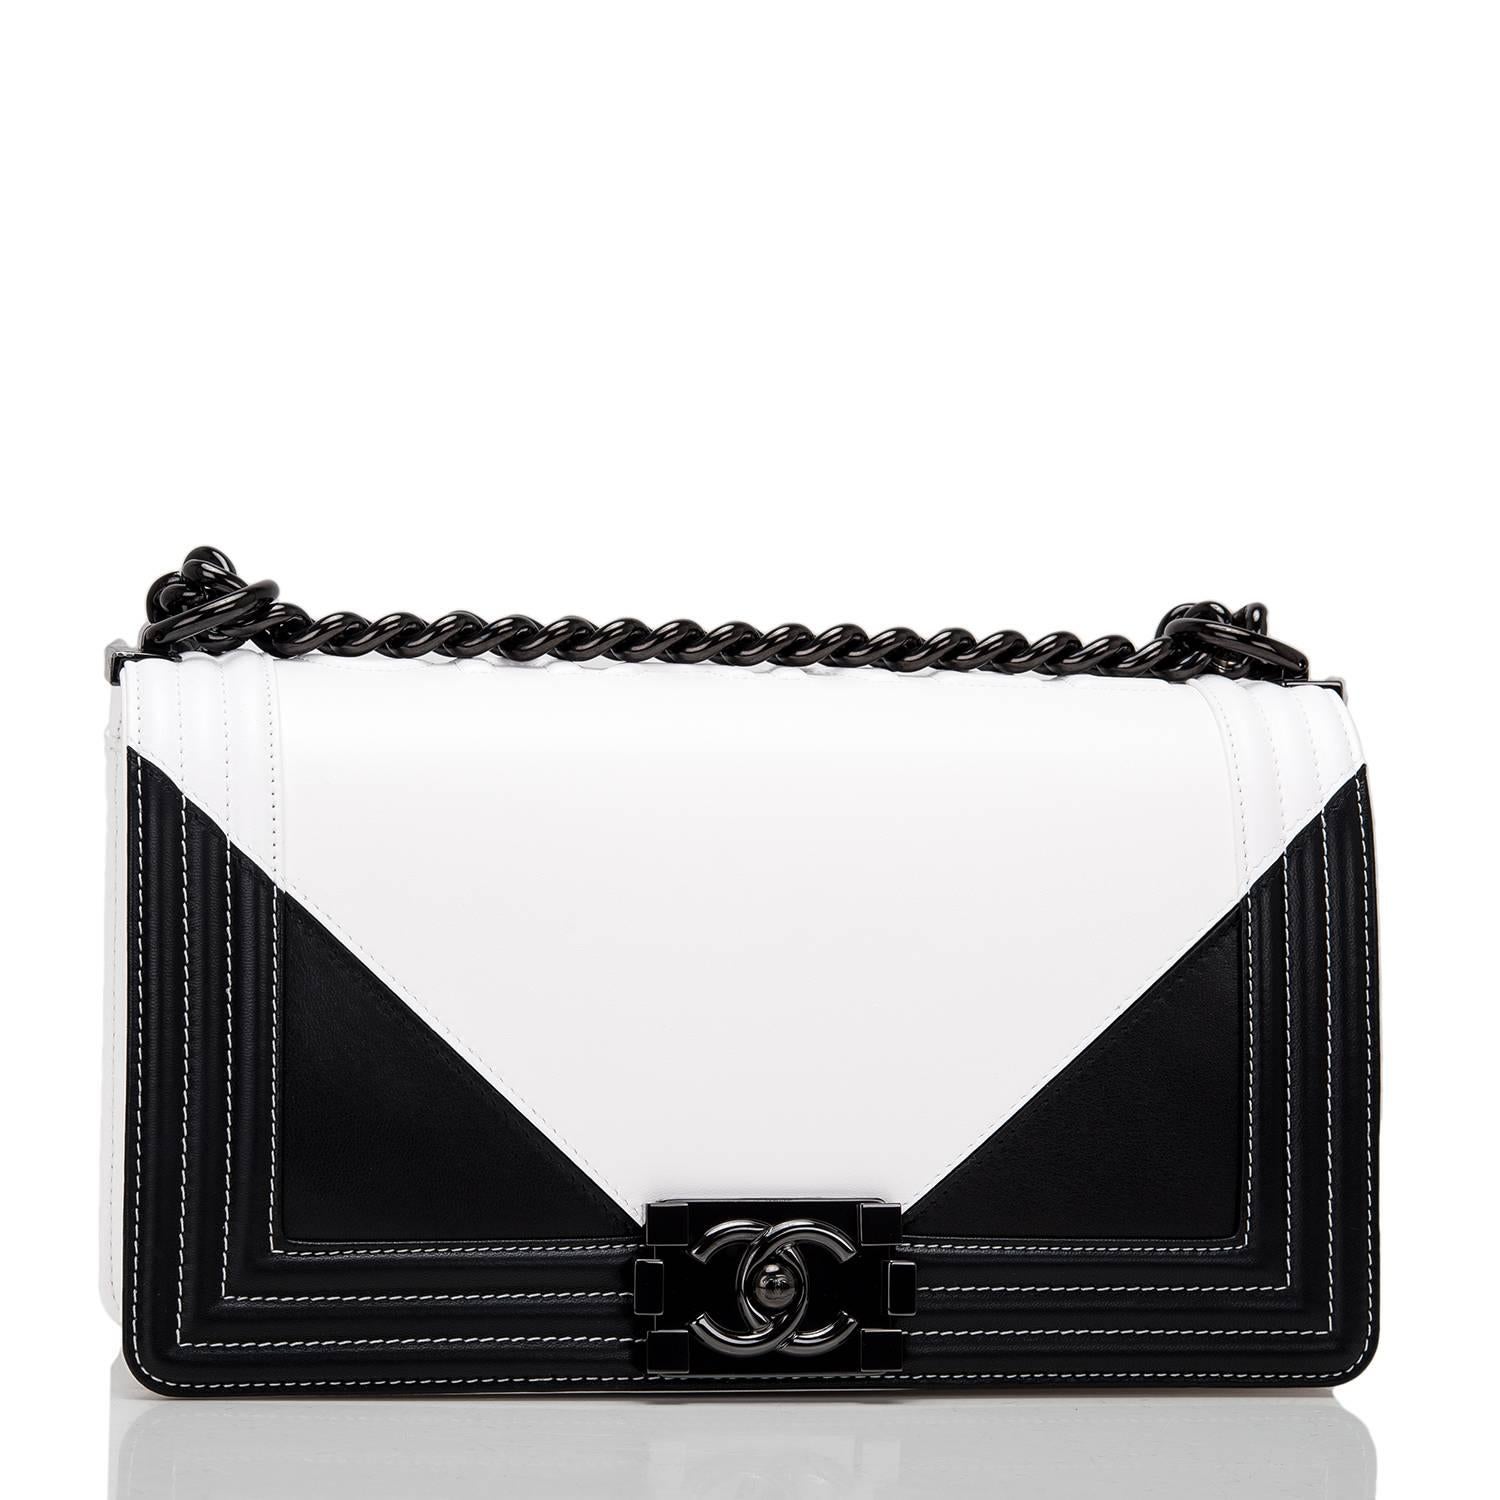 Chanel Old Medium Boy bag of black and white lambskin leather and black hardware.

This Chanel bag is in the Boy style with a full front flap with the Boy signature CC push lock closure, white stitching, smooth leather trim and black metal chain